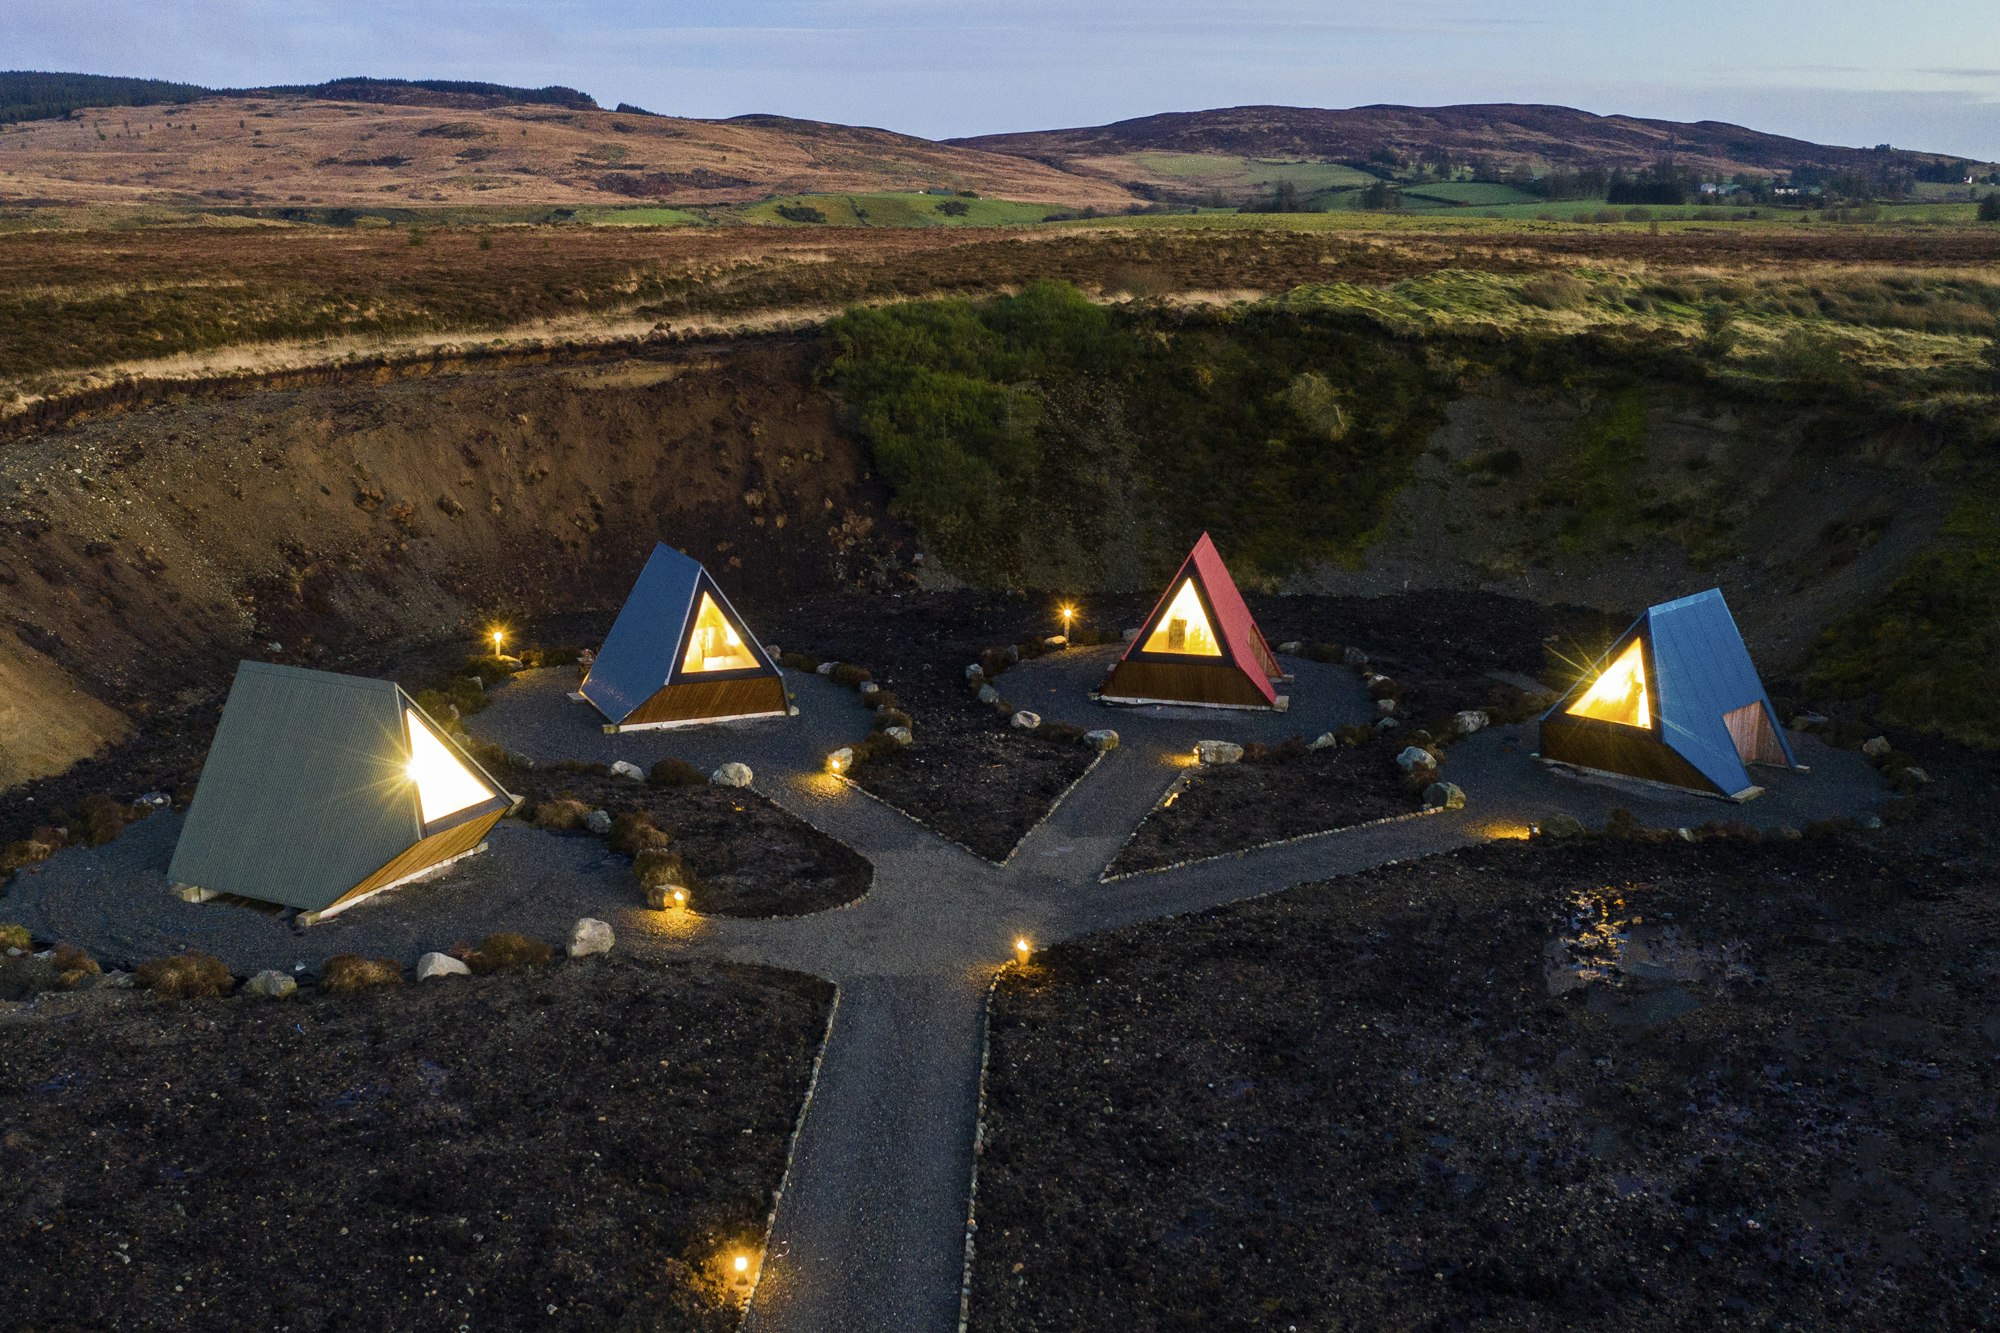 Four separate triangular pods lit up in a crater-like landscape